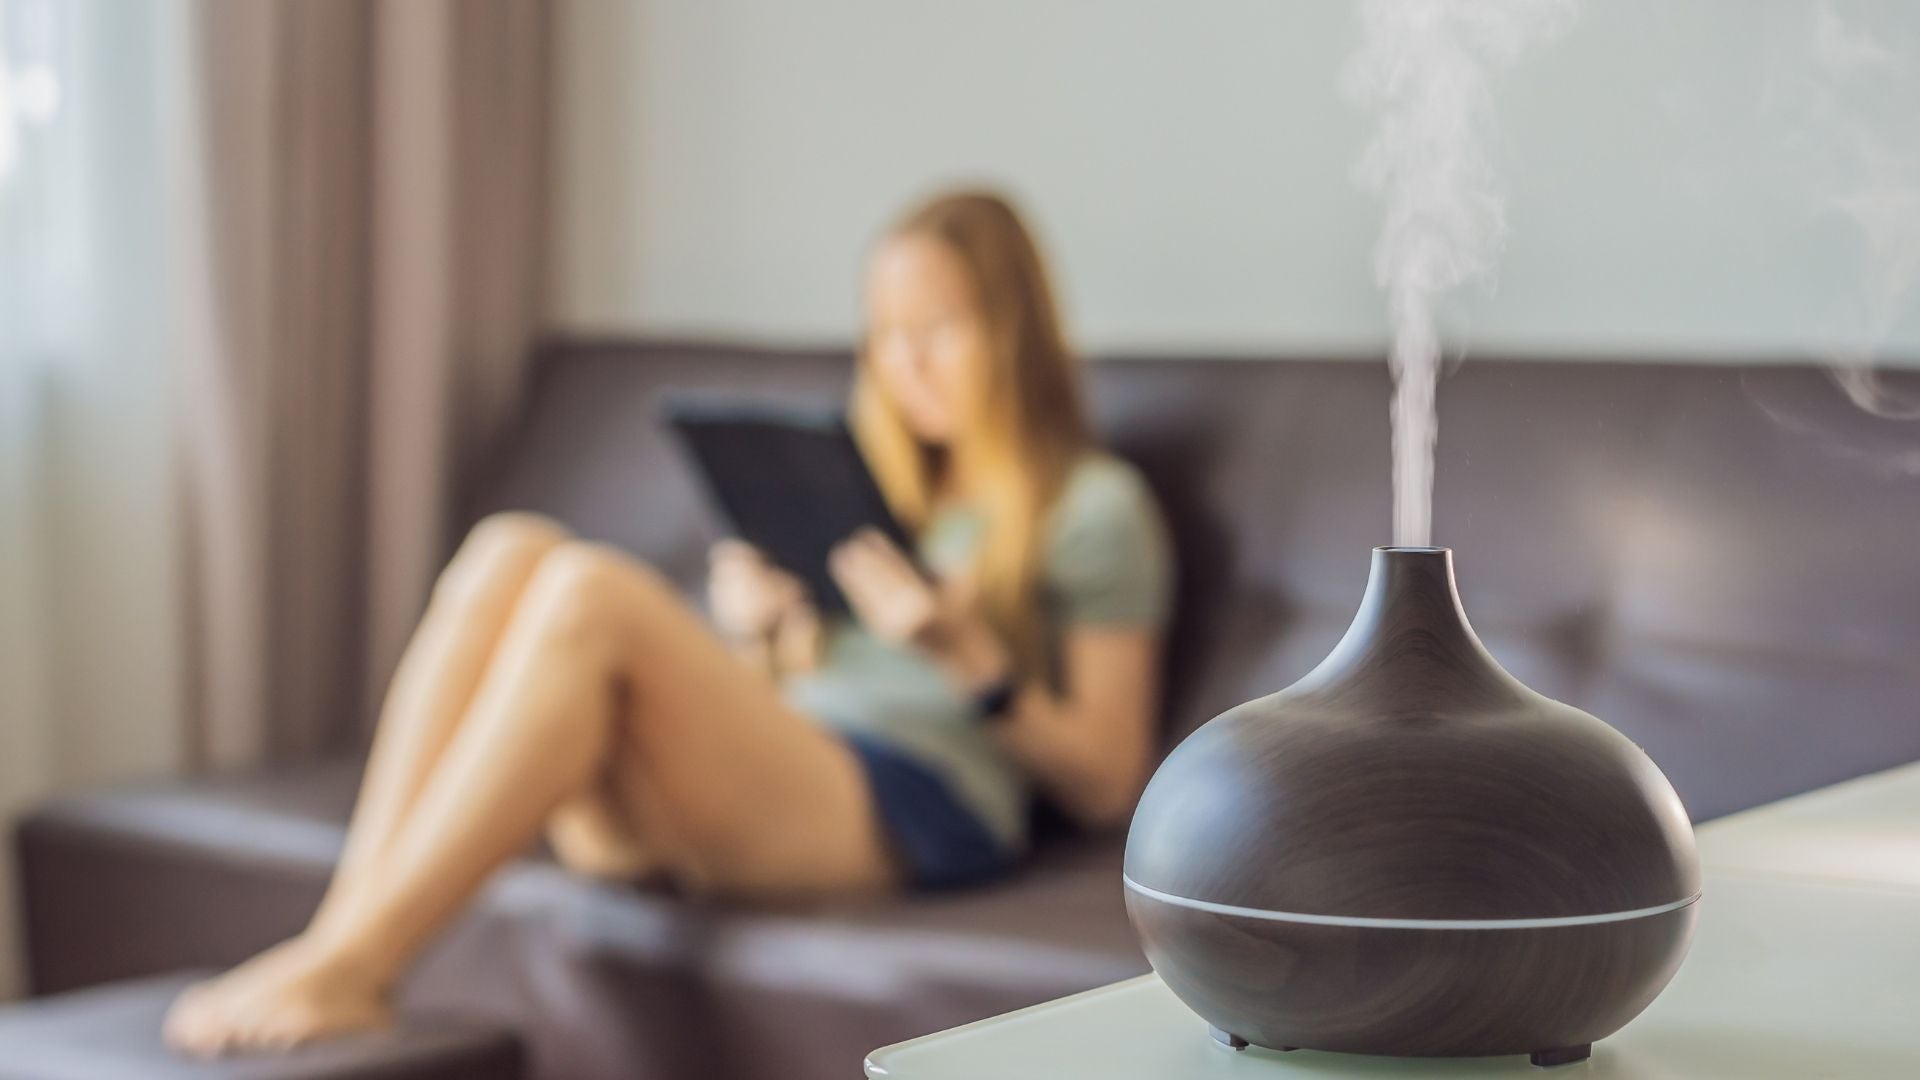 Best Places To Put an Essential Oil Diffuser in Your Home – Escents